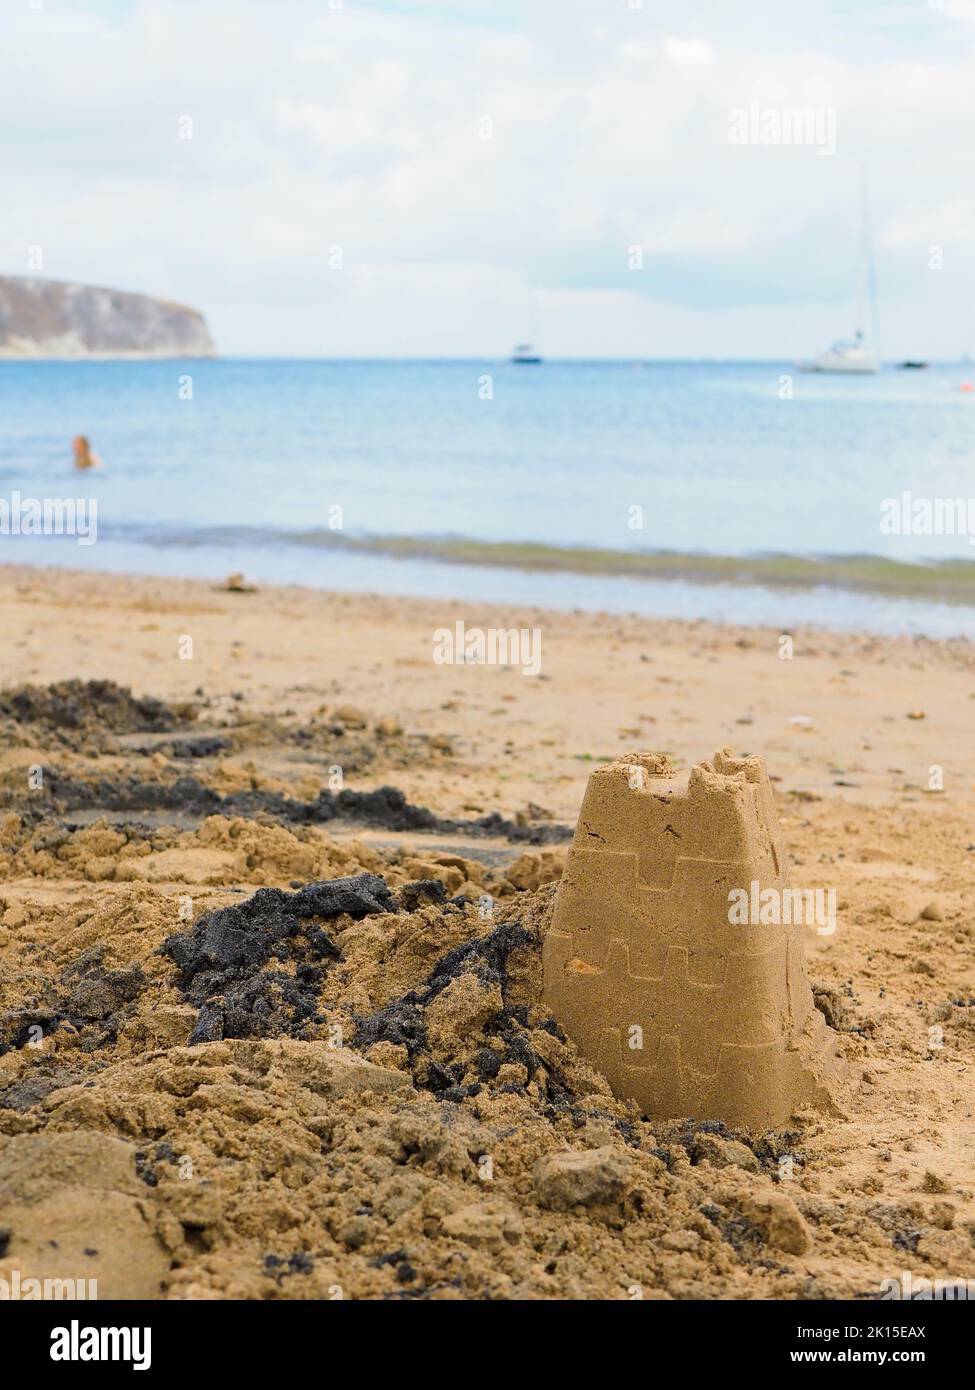 Close-up of a sandcastle on a beach with a blurred background of sea and cliffs Stock Photo